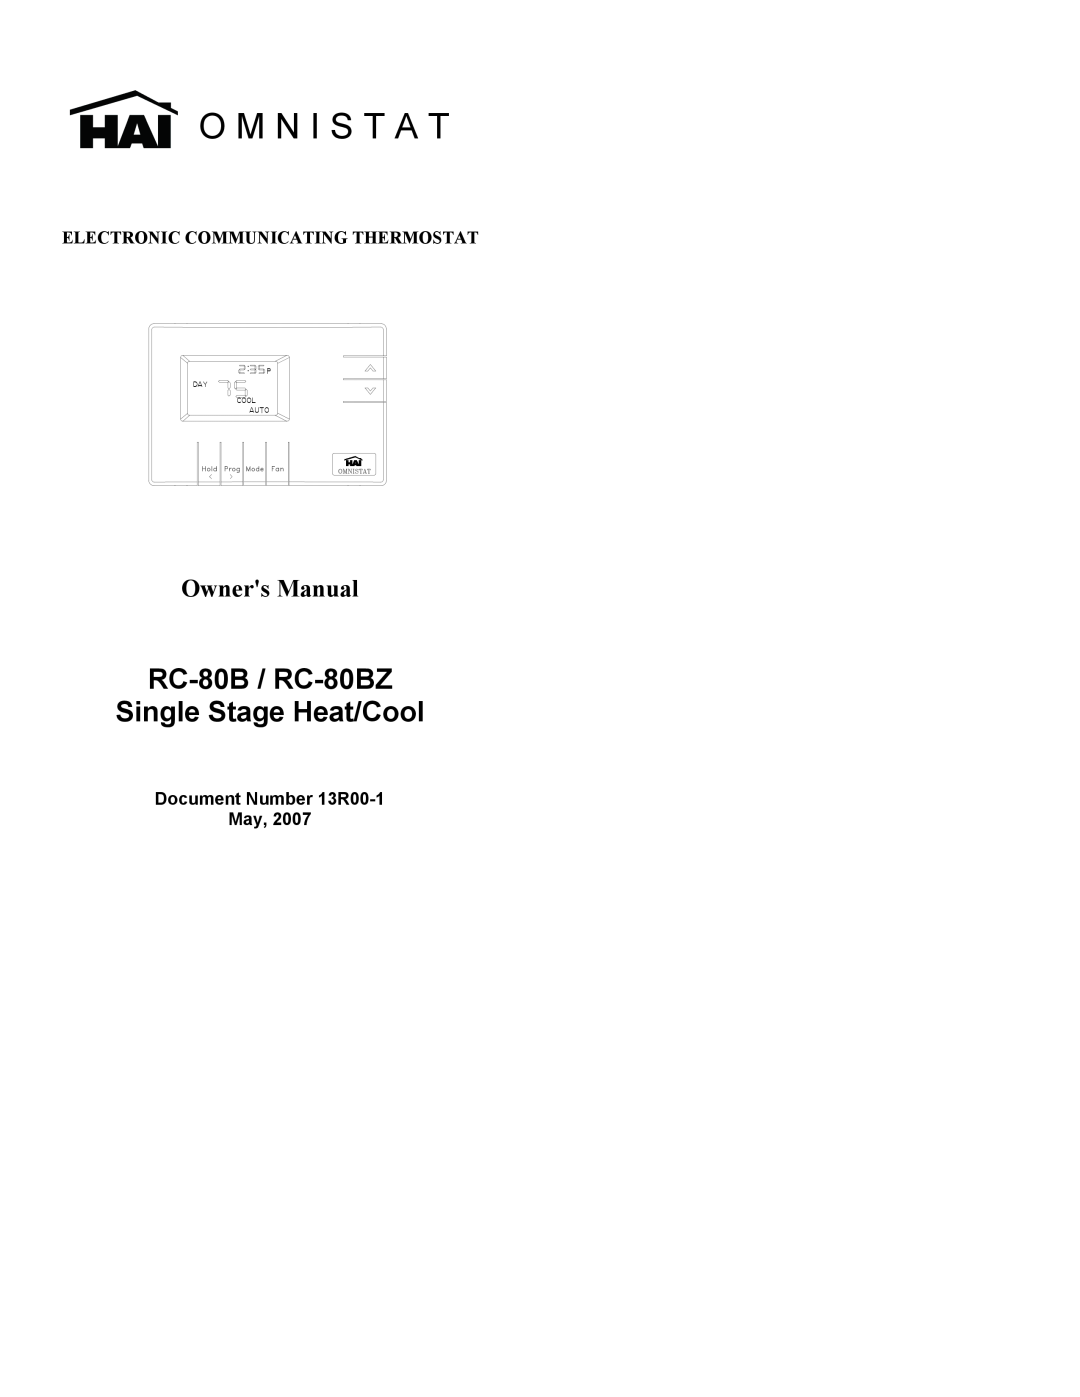 Home Automation RC-80B owner manual Electronic Communicating Thermostat, O M N I S T A T, Document Number 13R00-1 May 